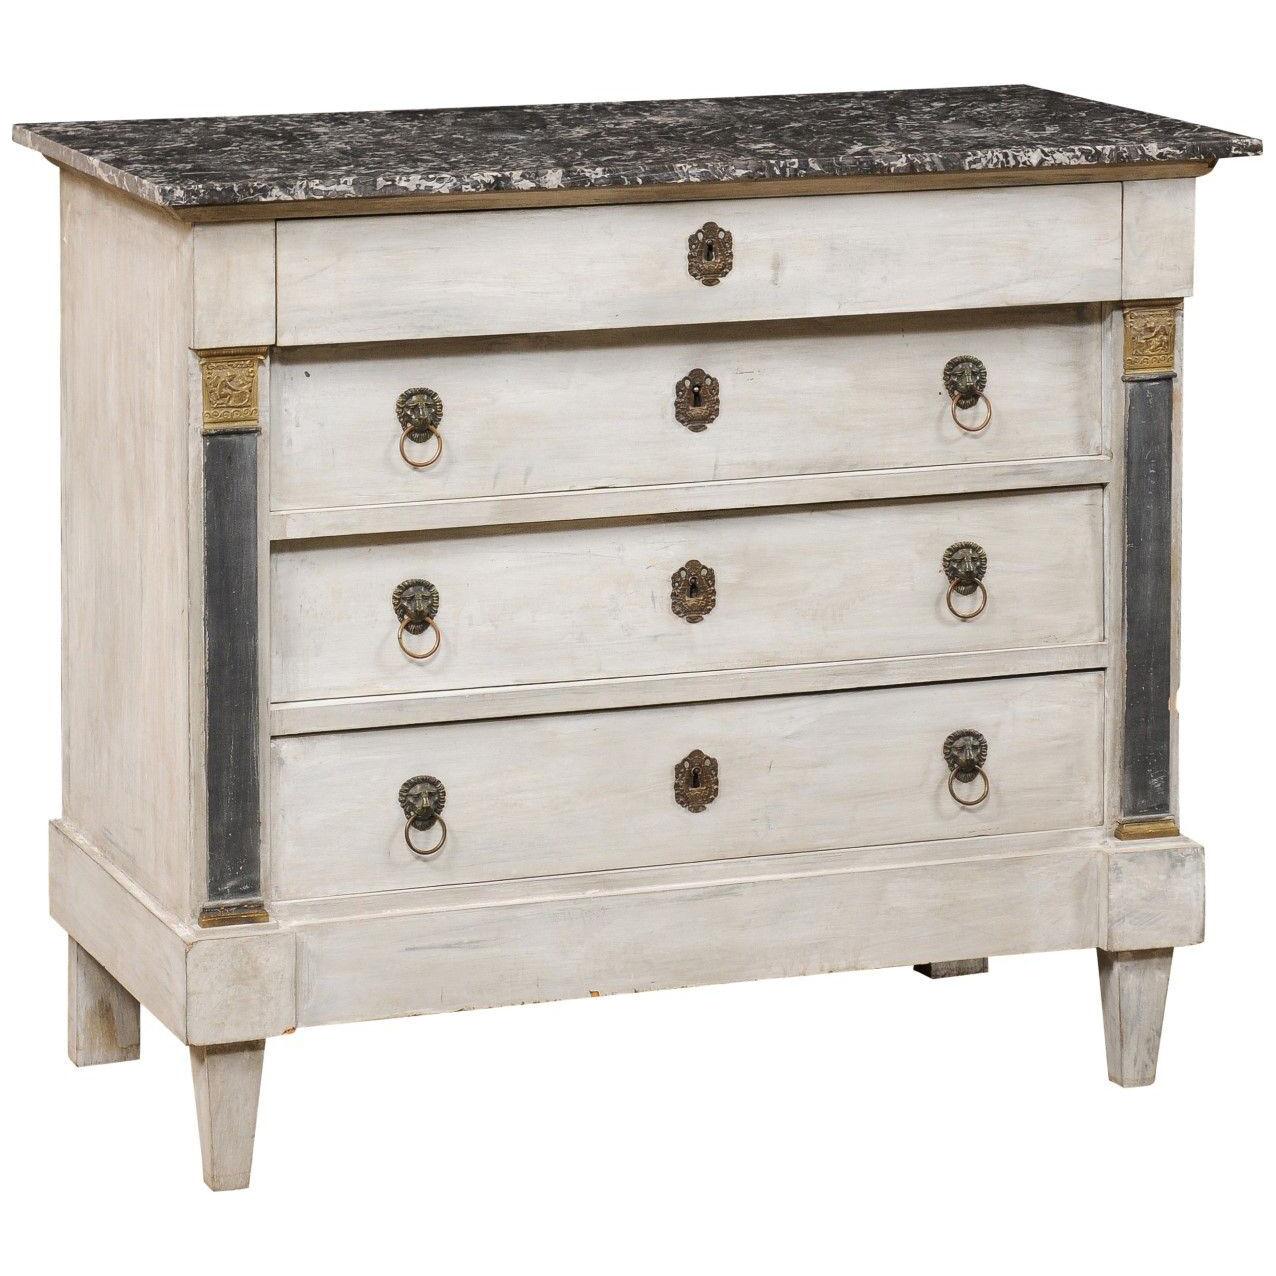 19th C. Neoclassic French Marble Top Chest